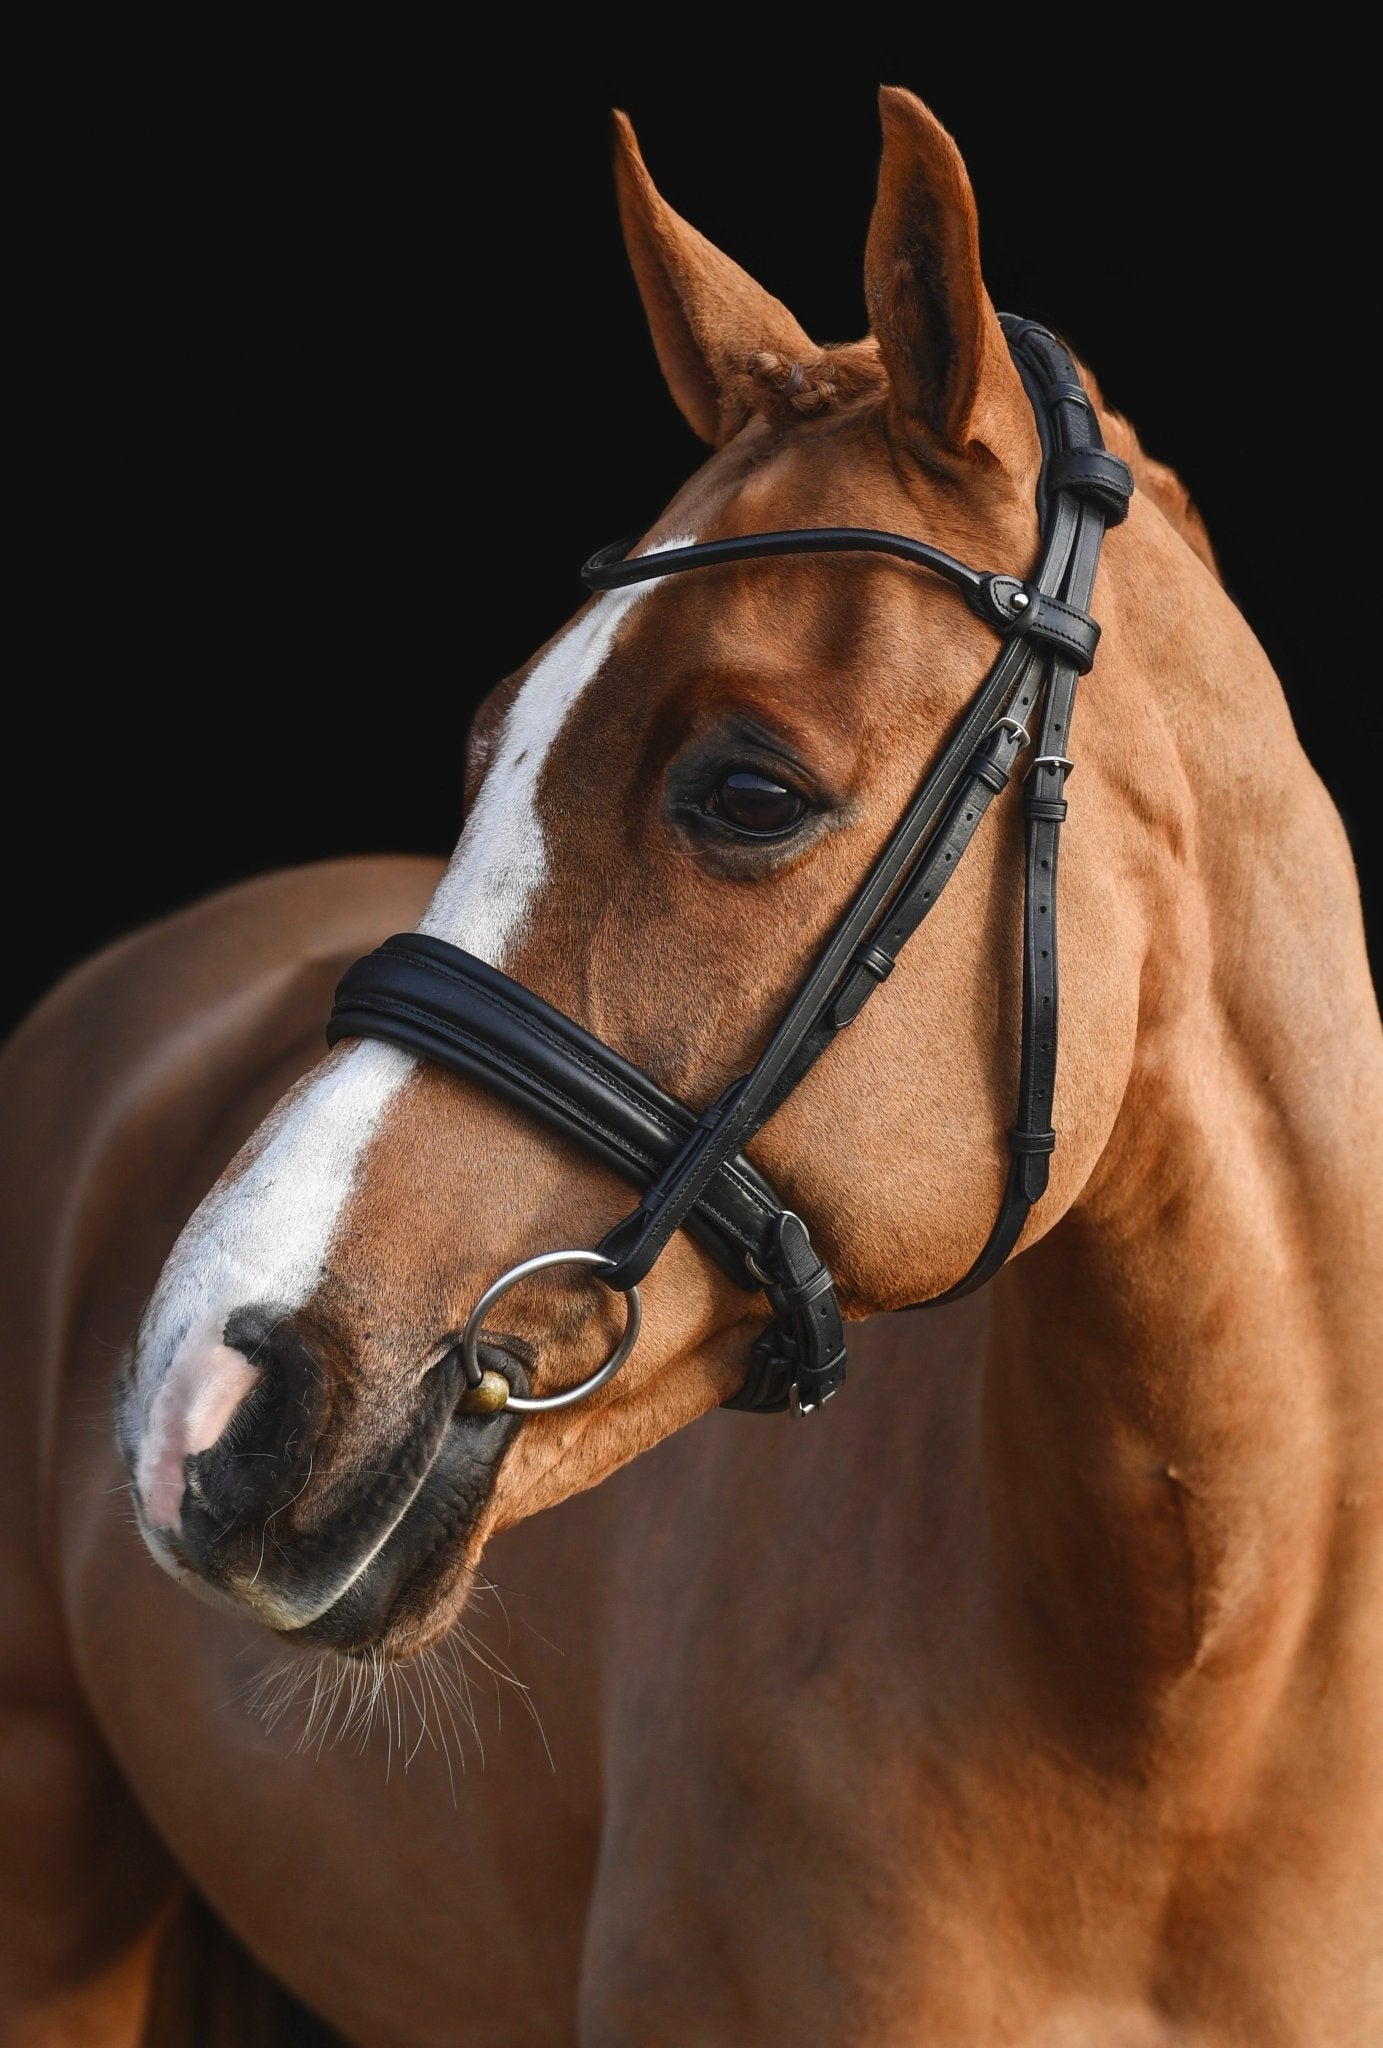 Convertible Classic Dressage Comfort Bridle, from The Urbany. Elevate your horse's style with sparkling crystals and comfort.